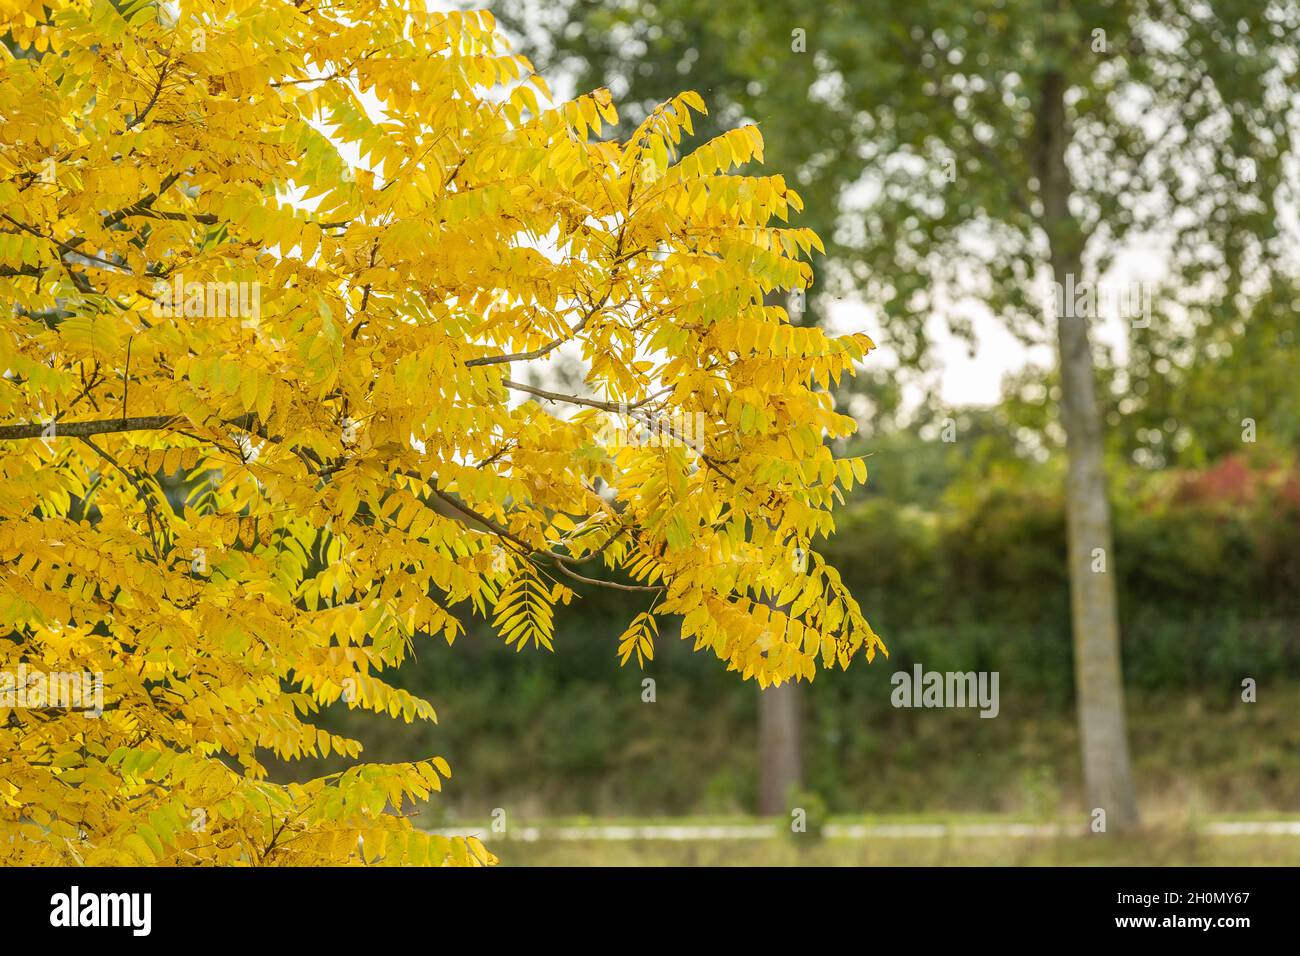 Close up leaves of  black walnut, american walnut, juglans nigra, in brilliant yellow autumn coloring against blurred background of green trees and sh Stock Photo